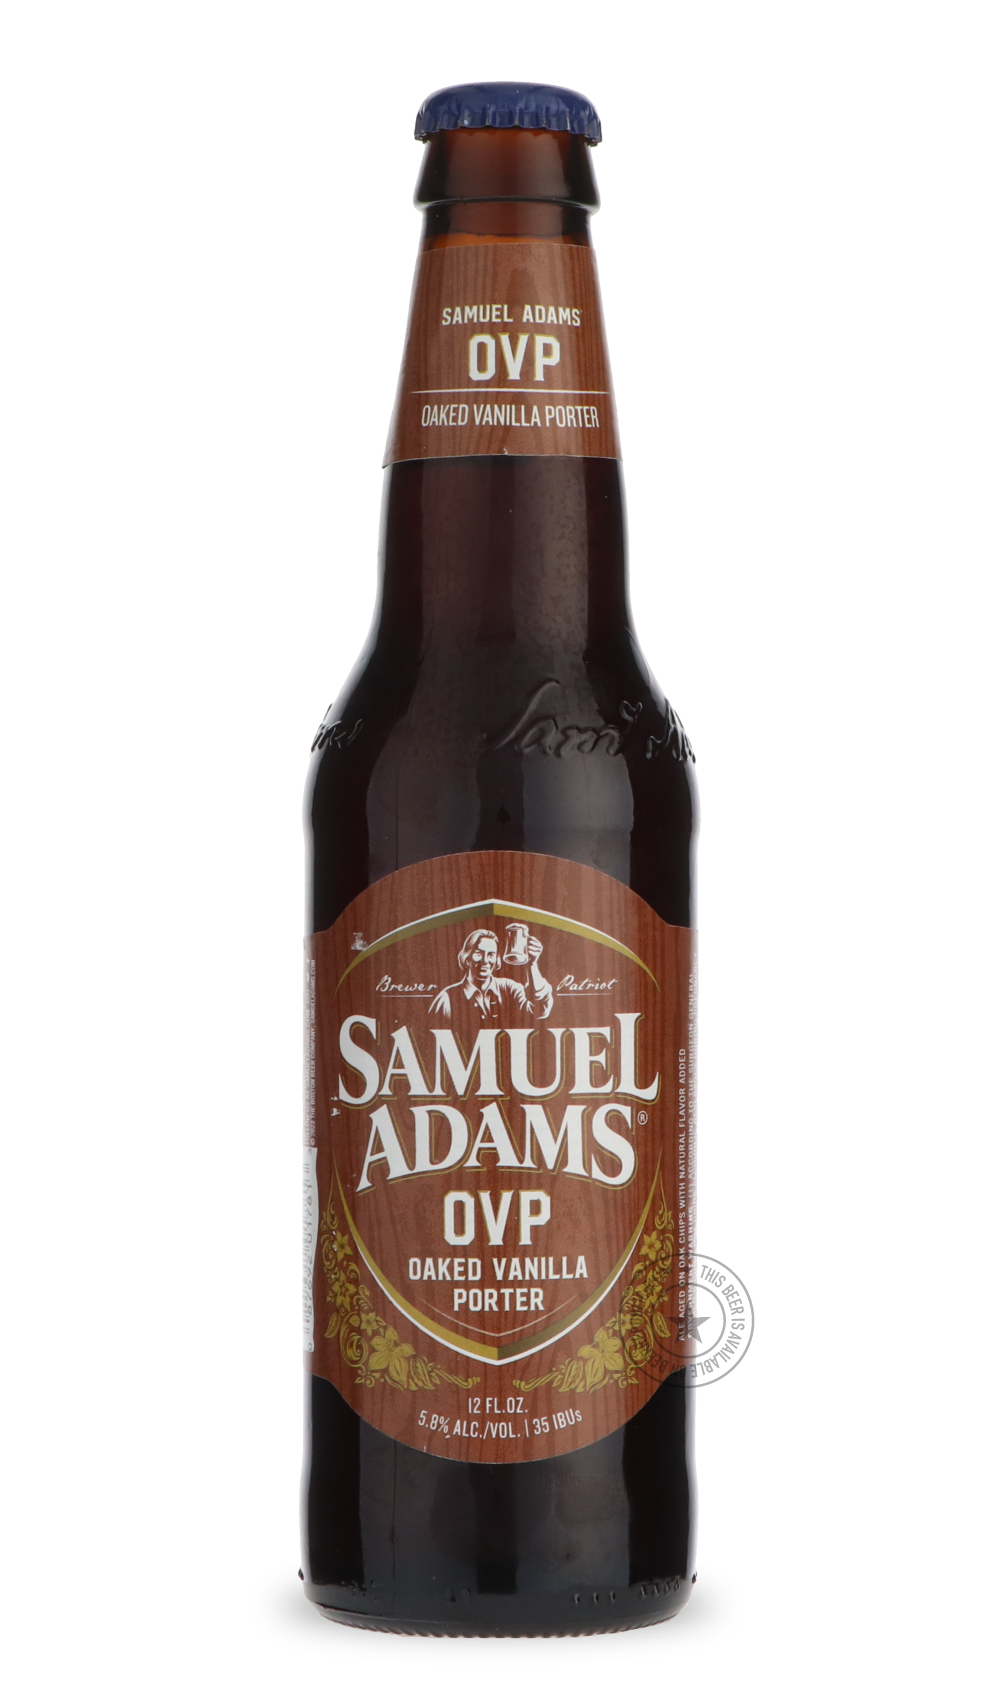 -Samuel Adams- Oaked Vanilla Porter-Stout & Porter- Only @ Beer Republic - The best online beer store for American & Canadian craft beer - Buy beer online from the USA and Canada - Bier online kopen - Amerikaans bier kopen - Craft beer store - Craft beer kopen - Amerikanisch bier kaufen - Bier online kaufen - Acheter biere online - IPA - Stout - Porter - New England IPA - Hazy IPA - Imperial Stout - Barrel Aged - Barrel Aged Imperial Stout - Brown - Dark beer - Blond - Blonde - Pilsner - Lager - Wheat - Wei